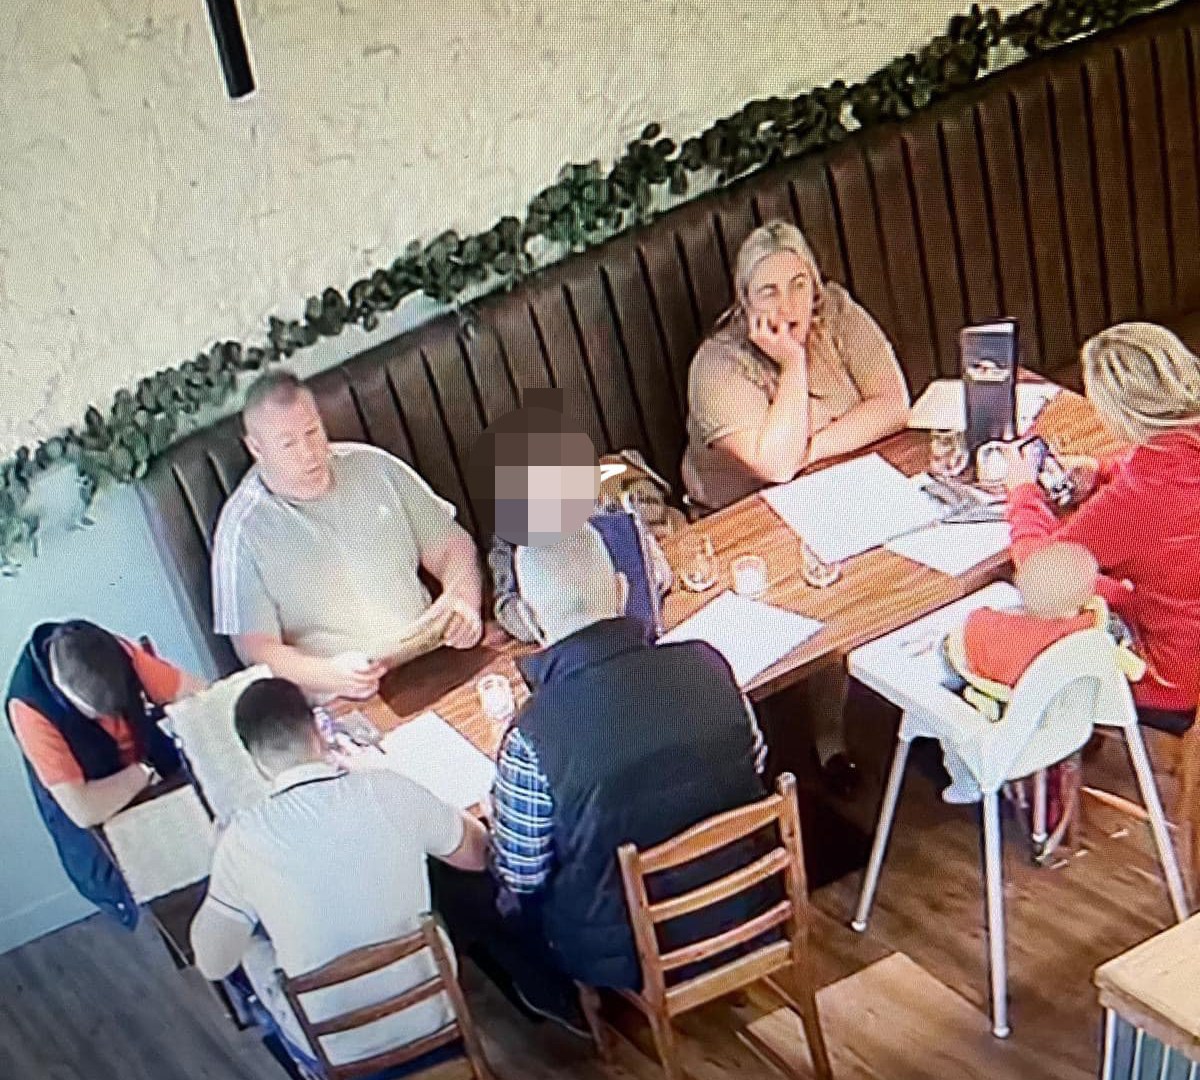 Serial dine and dash family-of-8 caught on camera doing runners at MORE restaurants – and are feared to have hit 7 [Video]